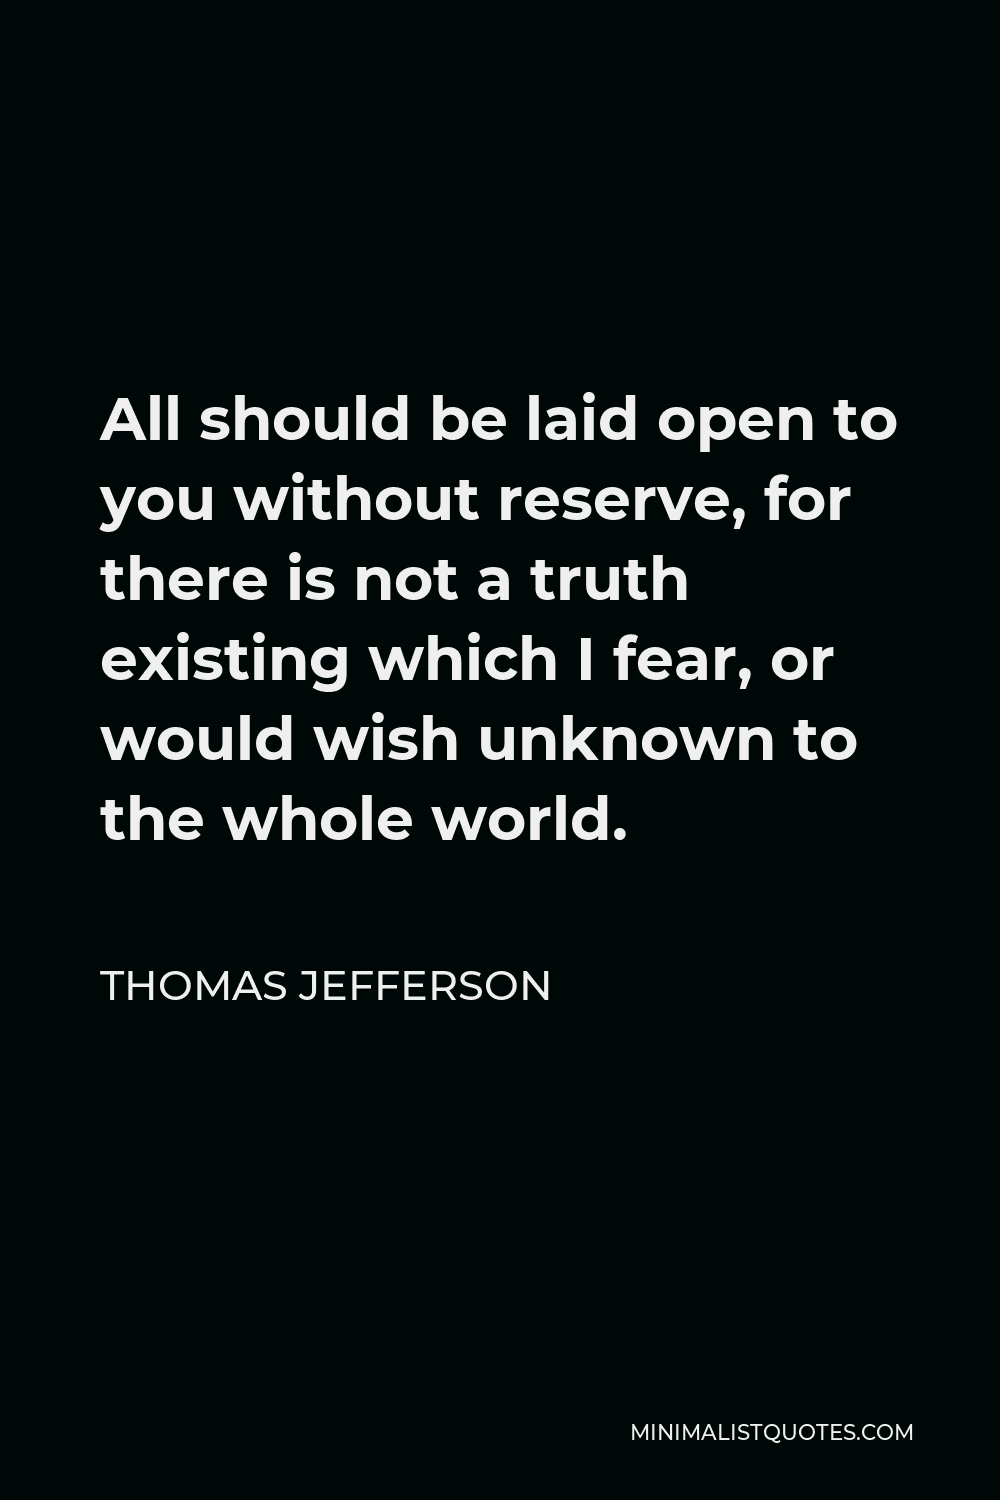 Thomas Jefferson Quote - All should be laid open to you without reserve, for there is not a truth existing which I fear, or would wish unknown to the whole world.